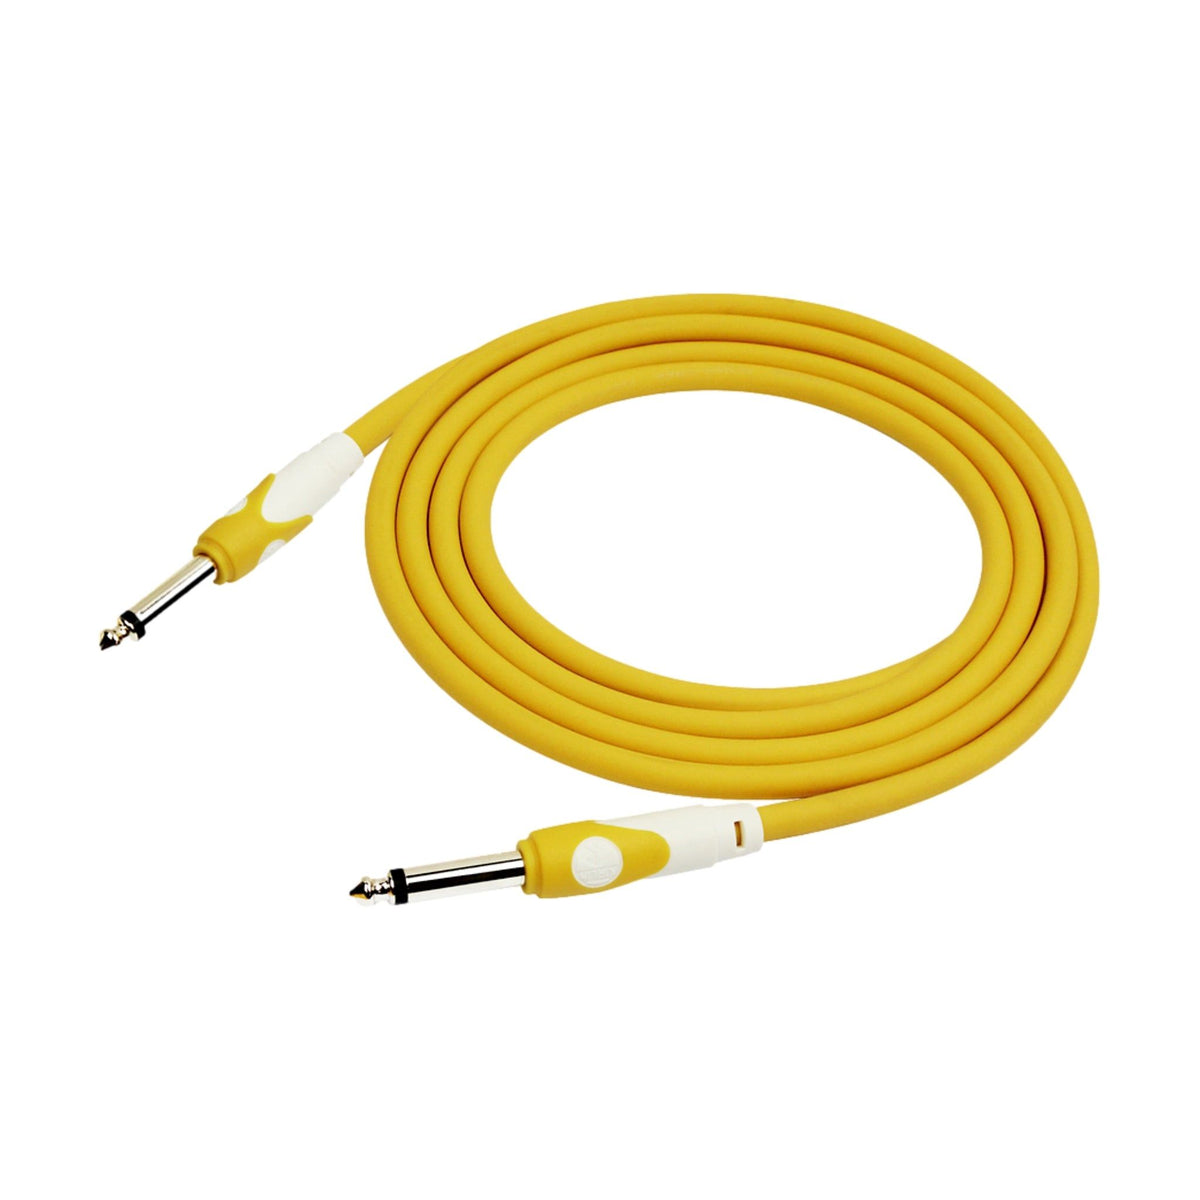 Kirlin 20ft Guitar Cable Yellow